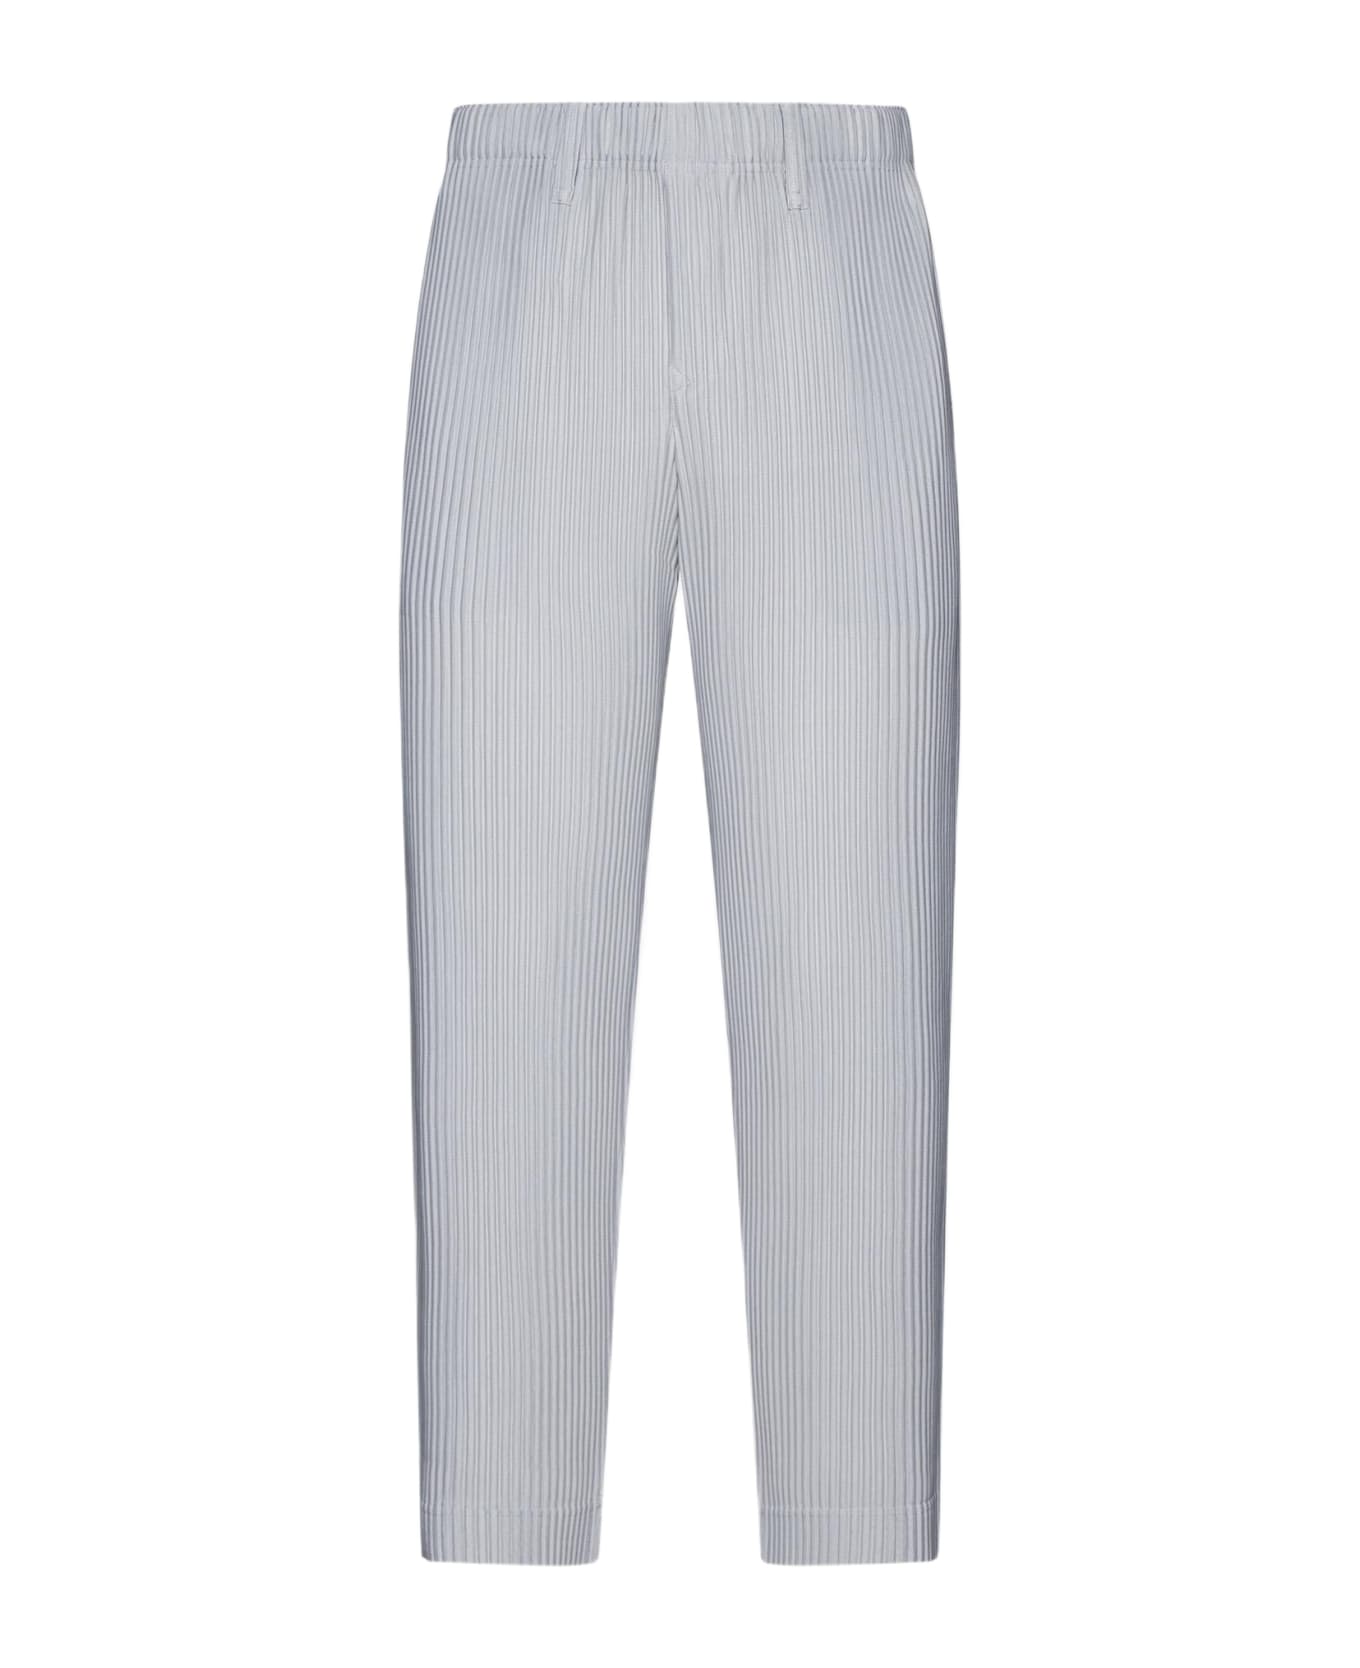 Homme Plissé Issey Miyake Pleated Fabric Trousers - Light Grey ボトムス